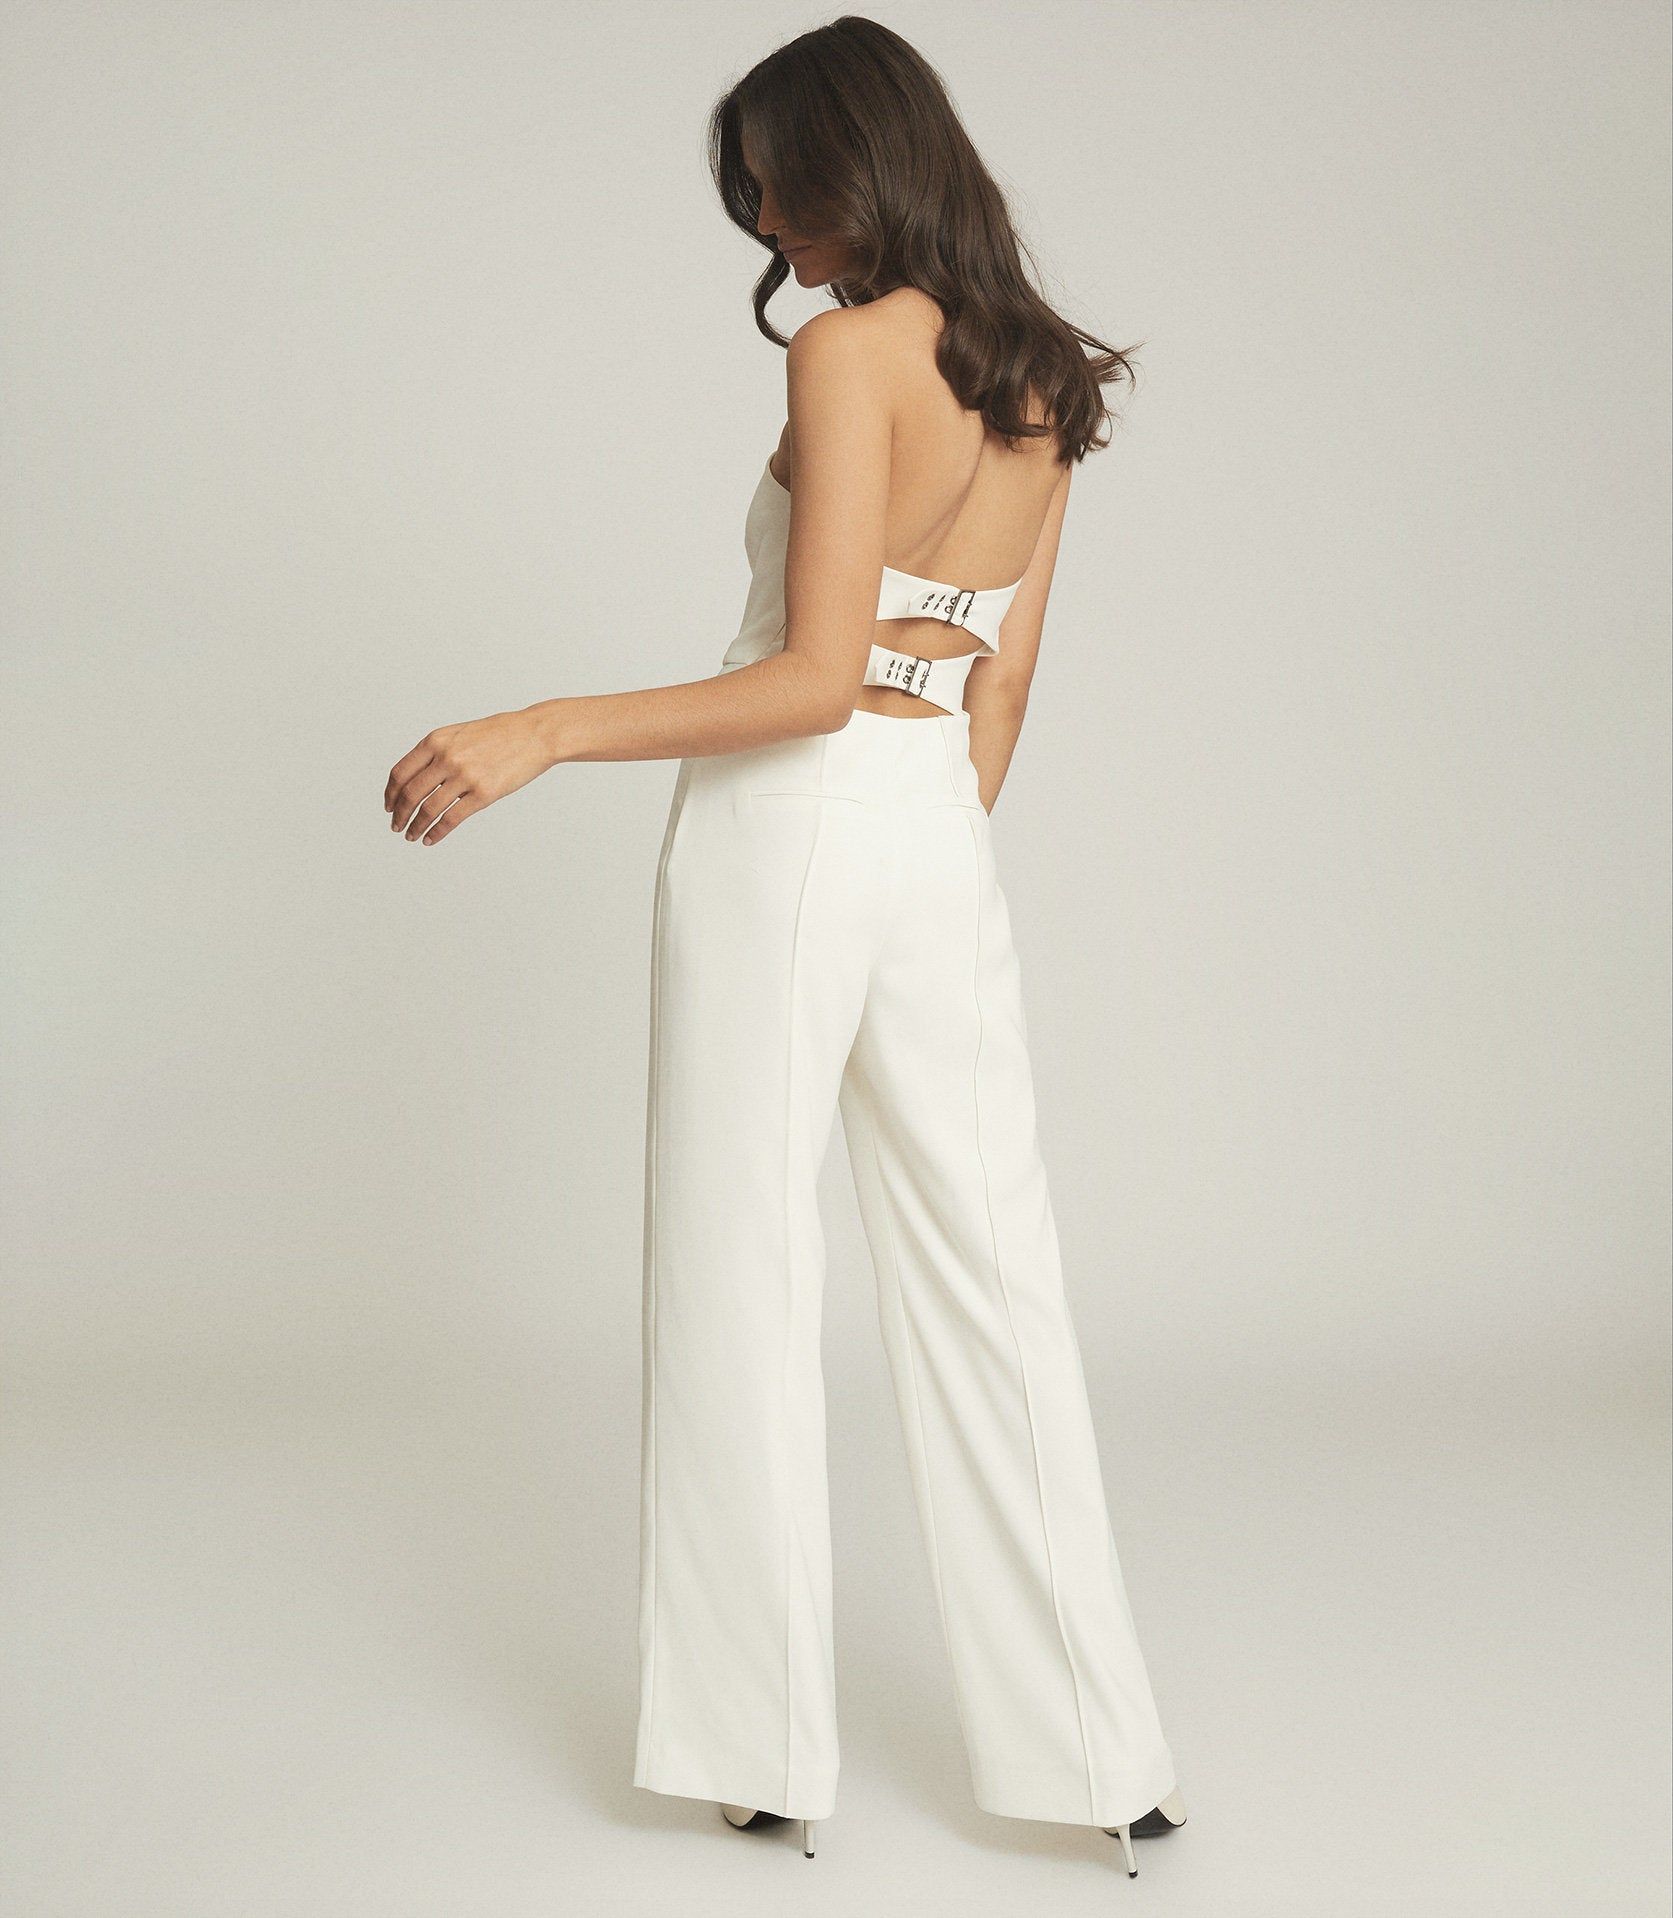 15 Bridal Jumpsuits 2022 - White Pant Suits and White Jumpsuits for ...